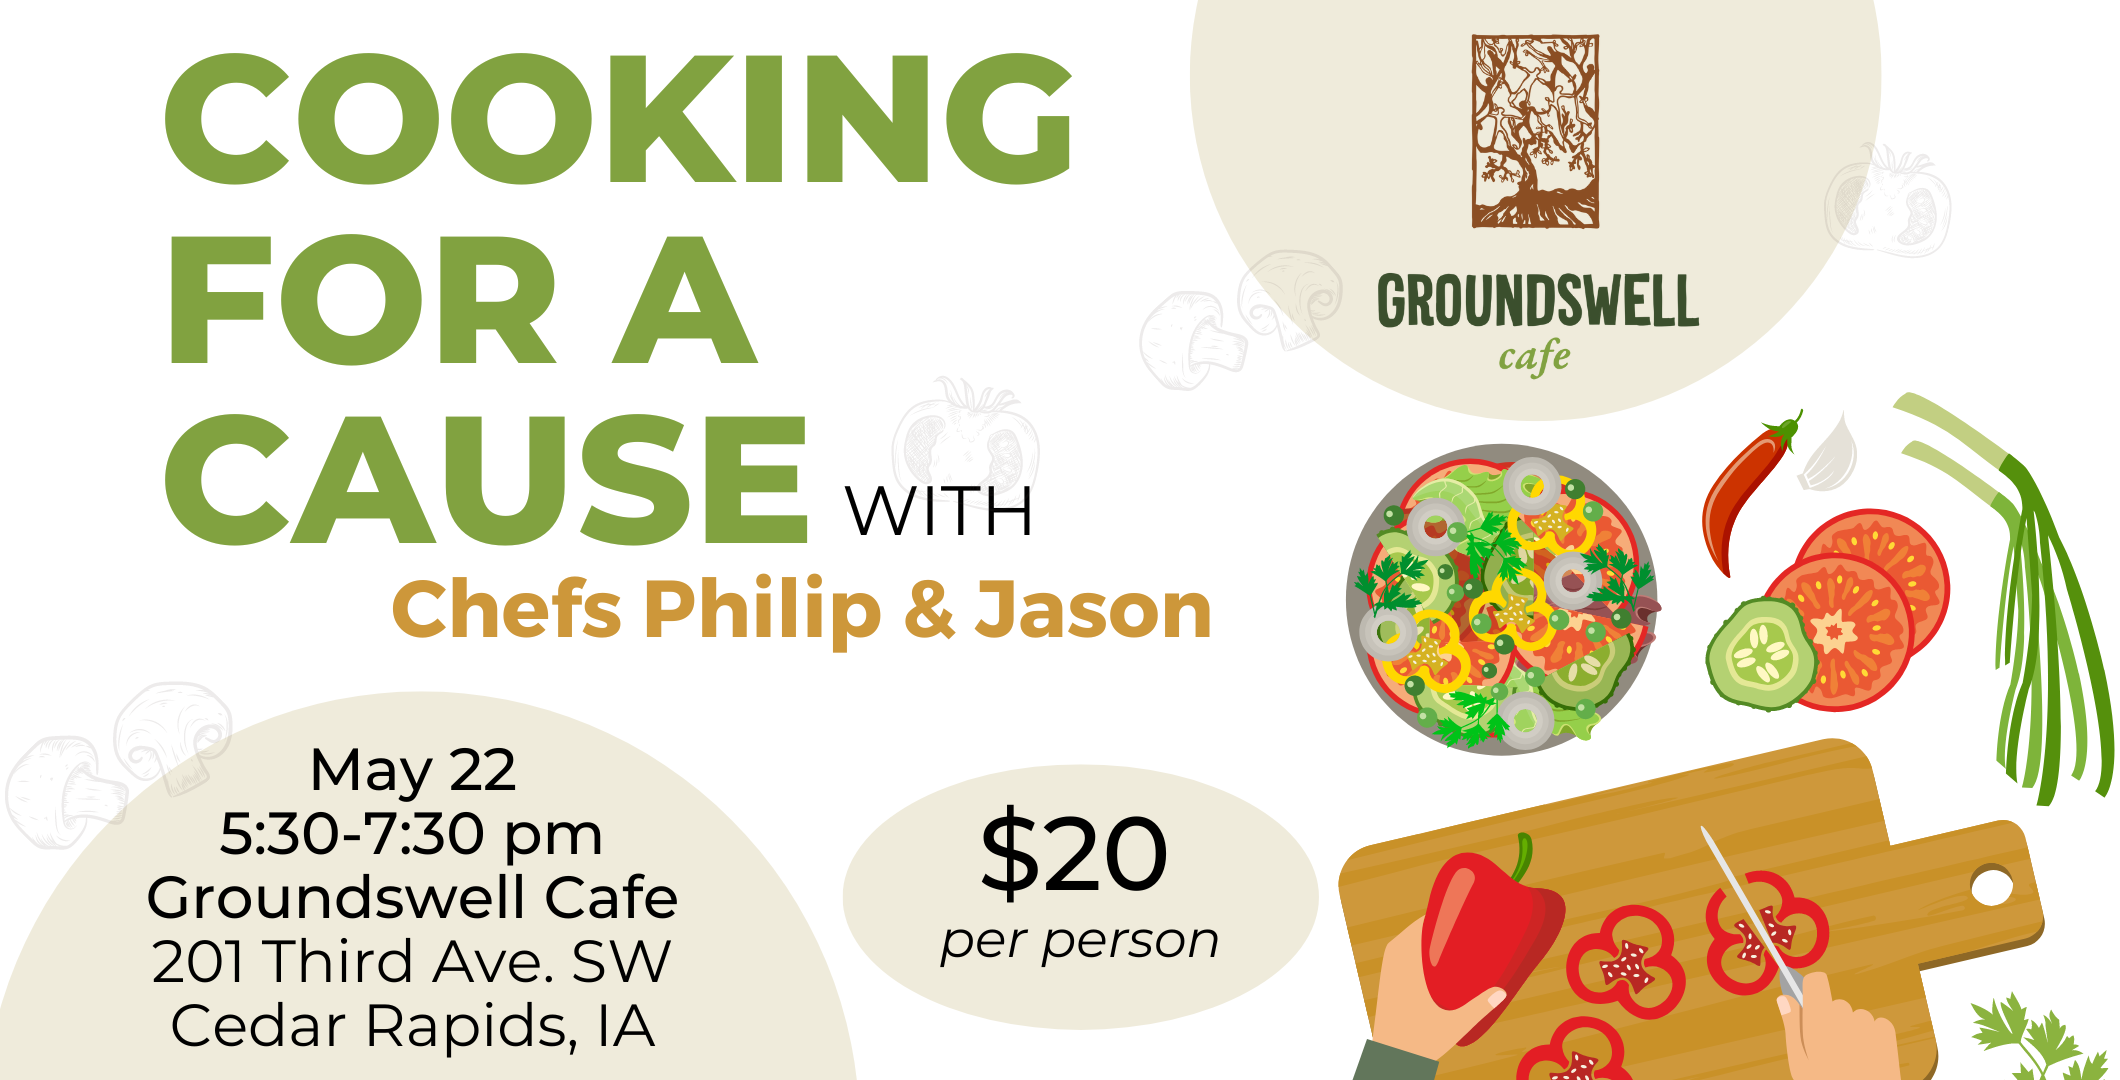 Cooking for a cause, may 22, 5:30 pm at Groundswell Cafe in Cedar Rapids